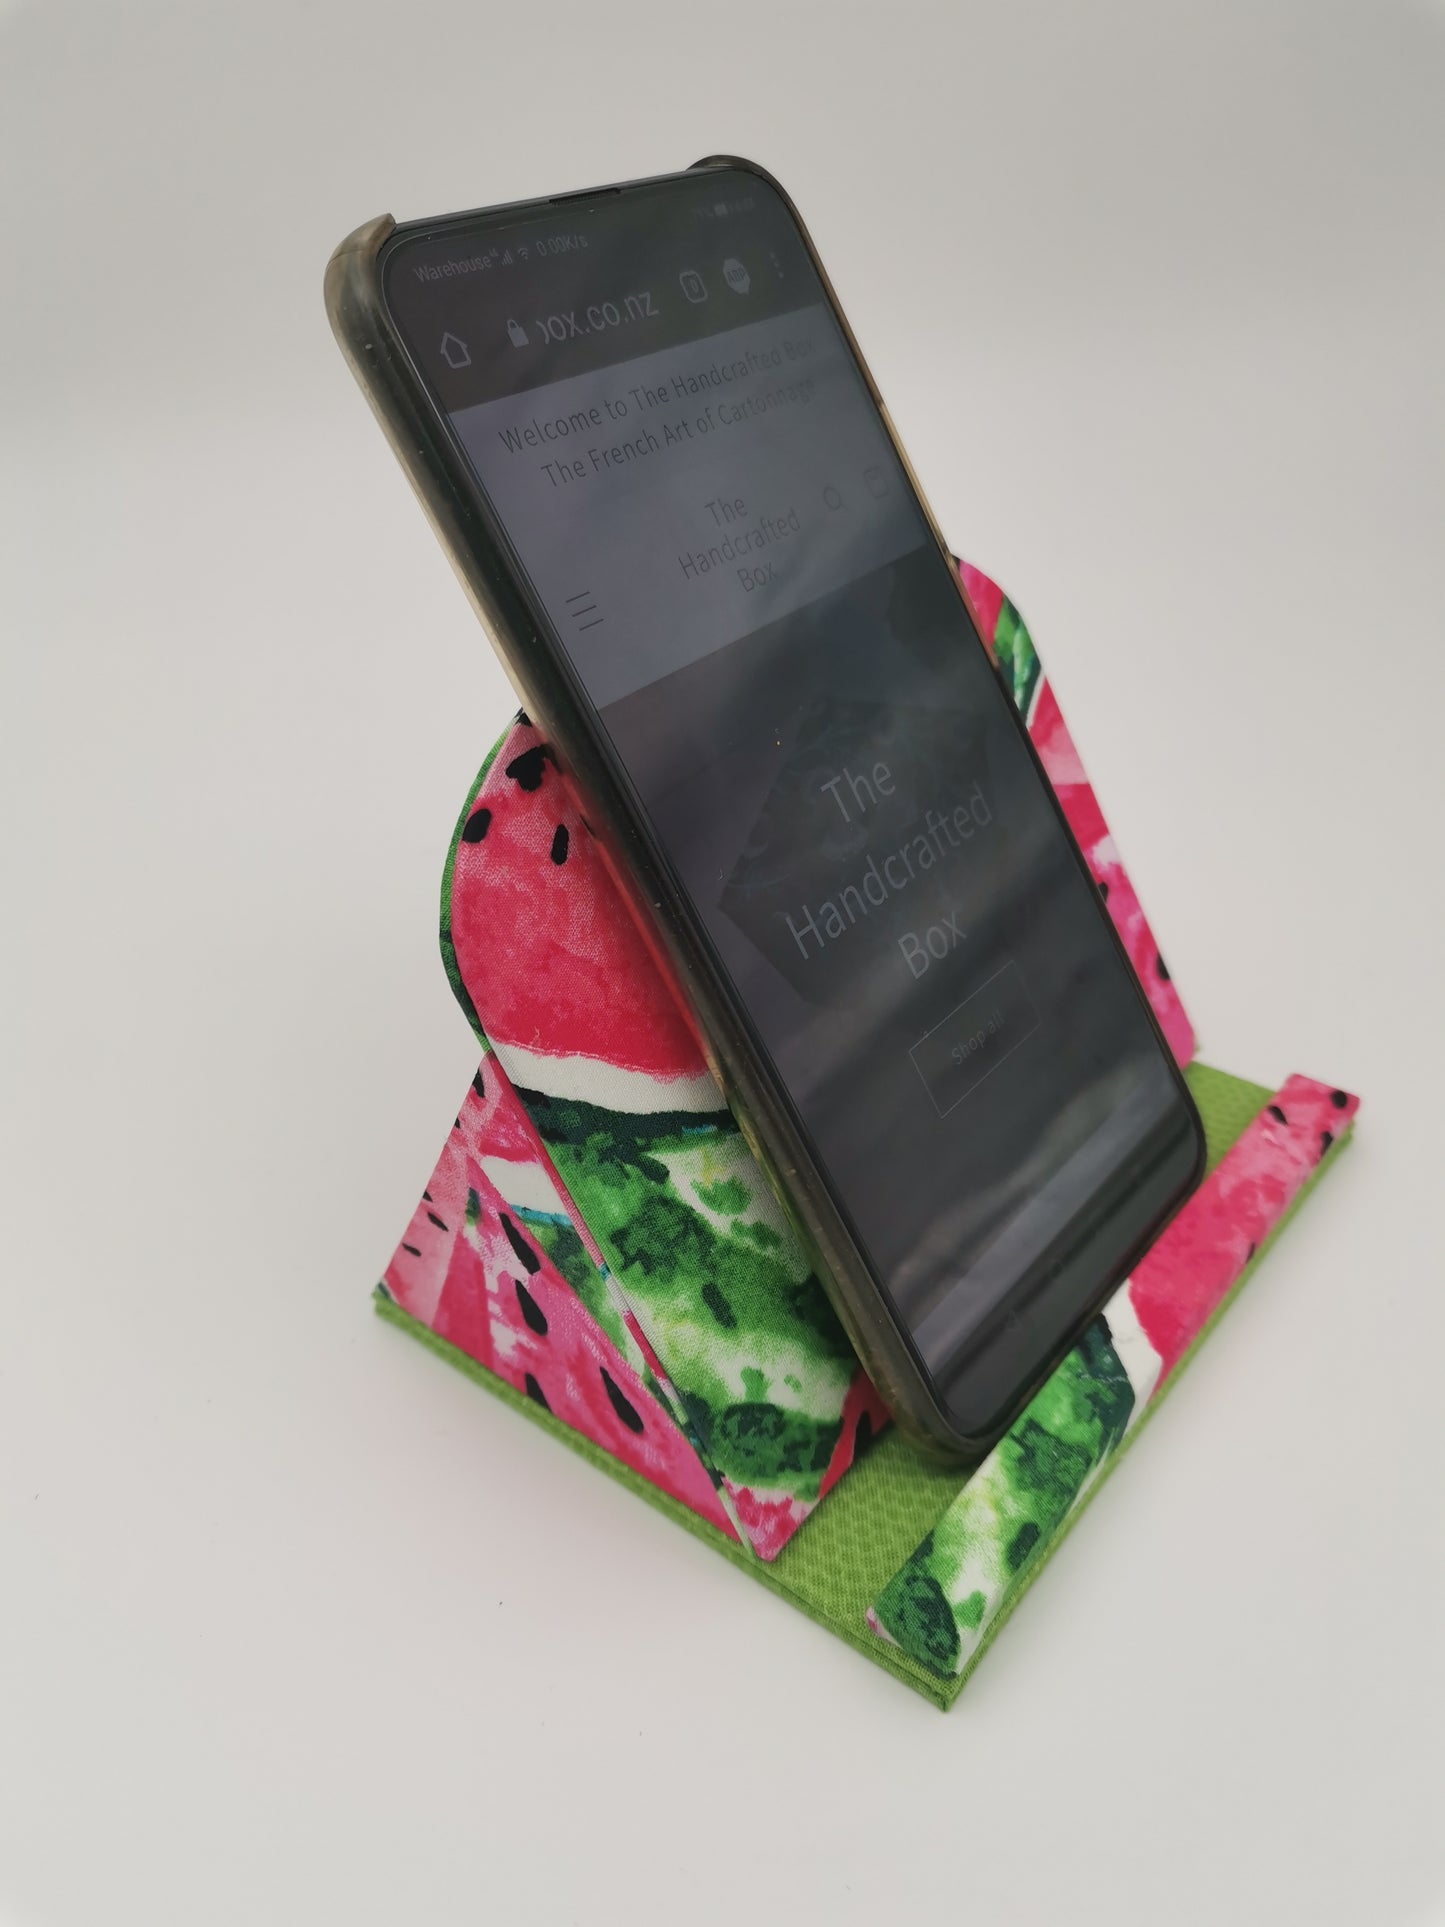 Cartonnage Kit - Mobile Phone Stand